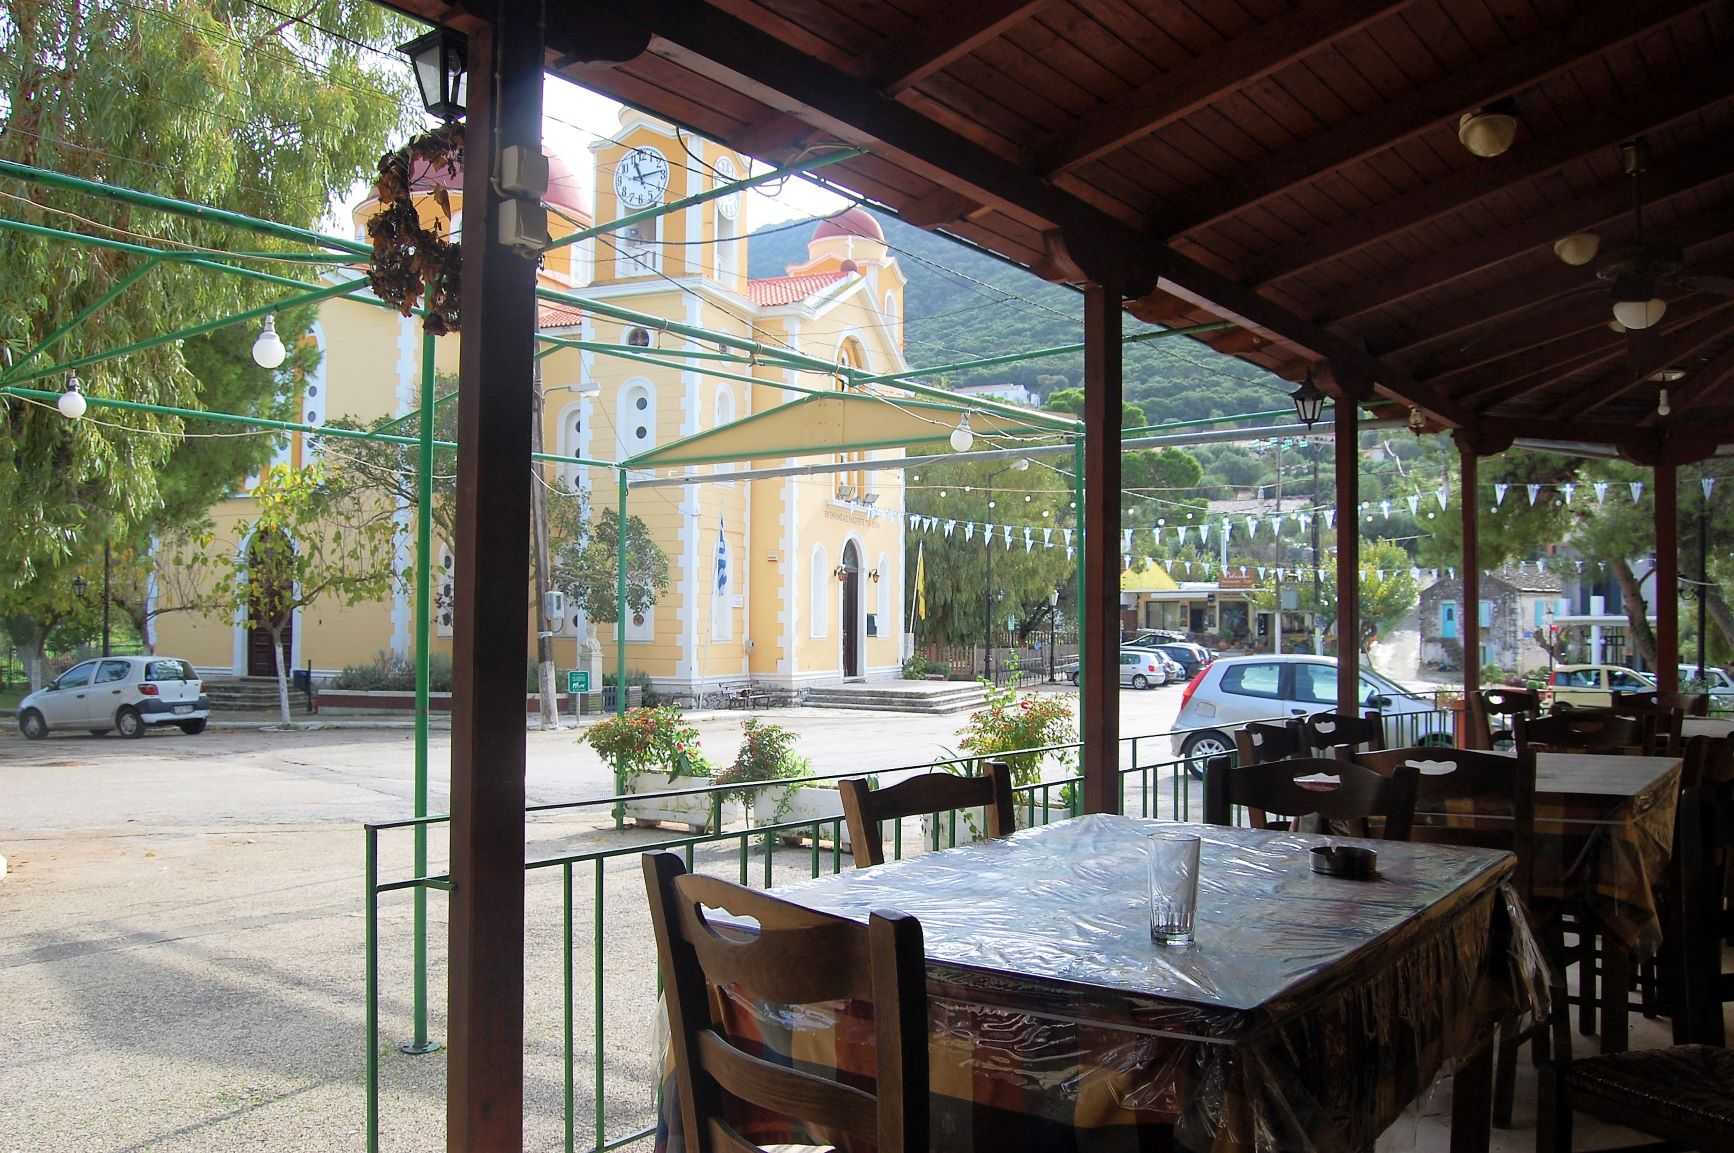 Outside seating area of restaurant for sale in Ithaca Greece, Stavros